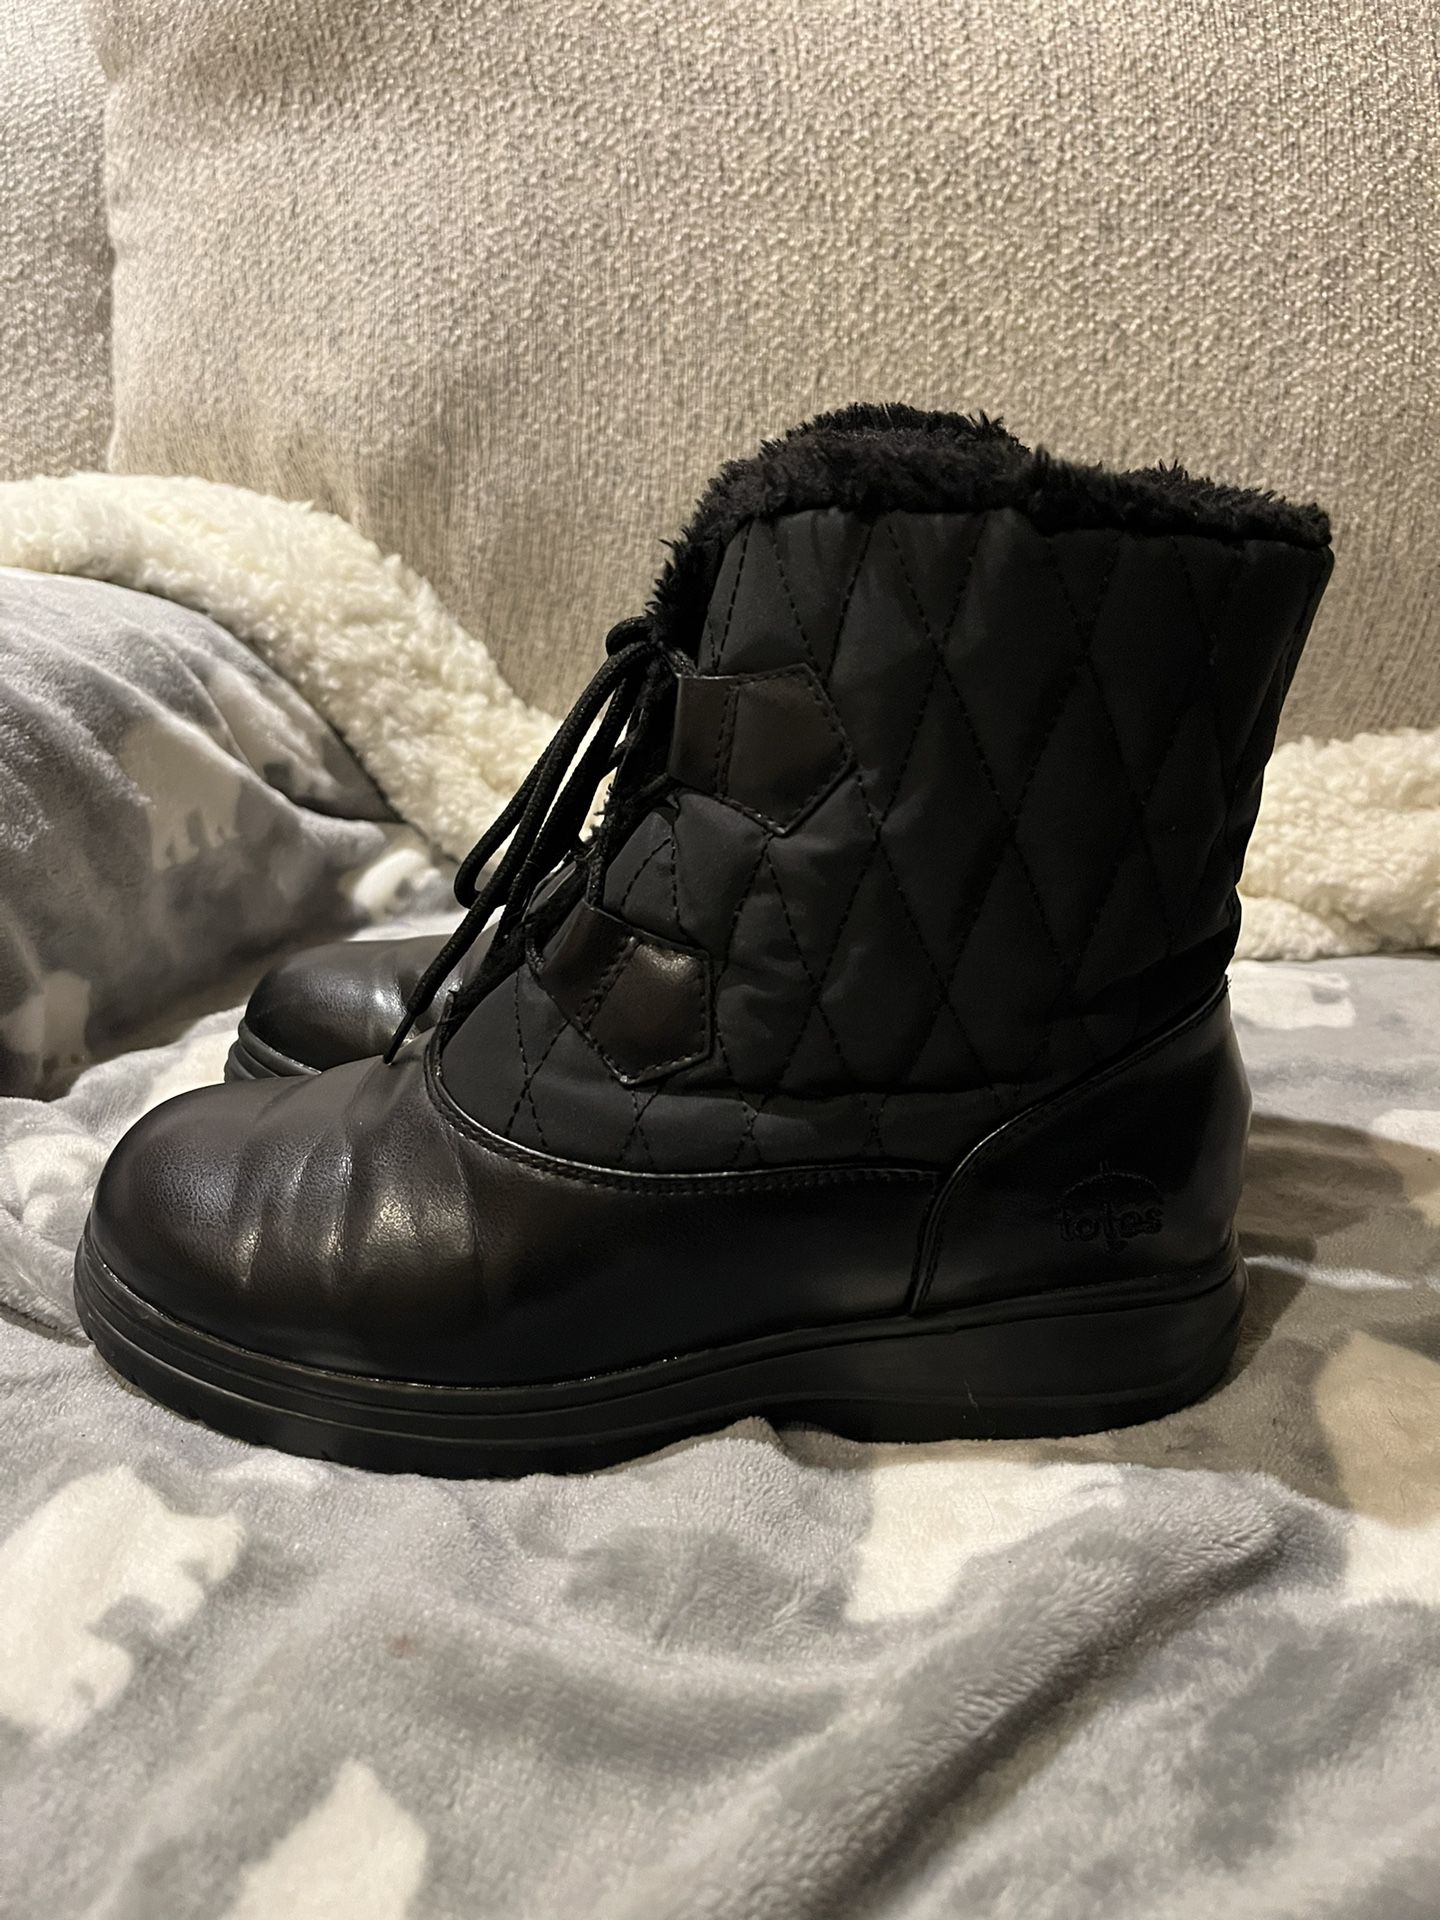 Womens Black Snow Boots Size 7